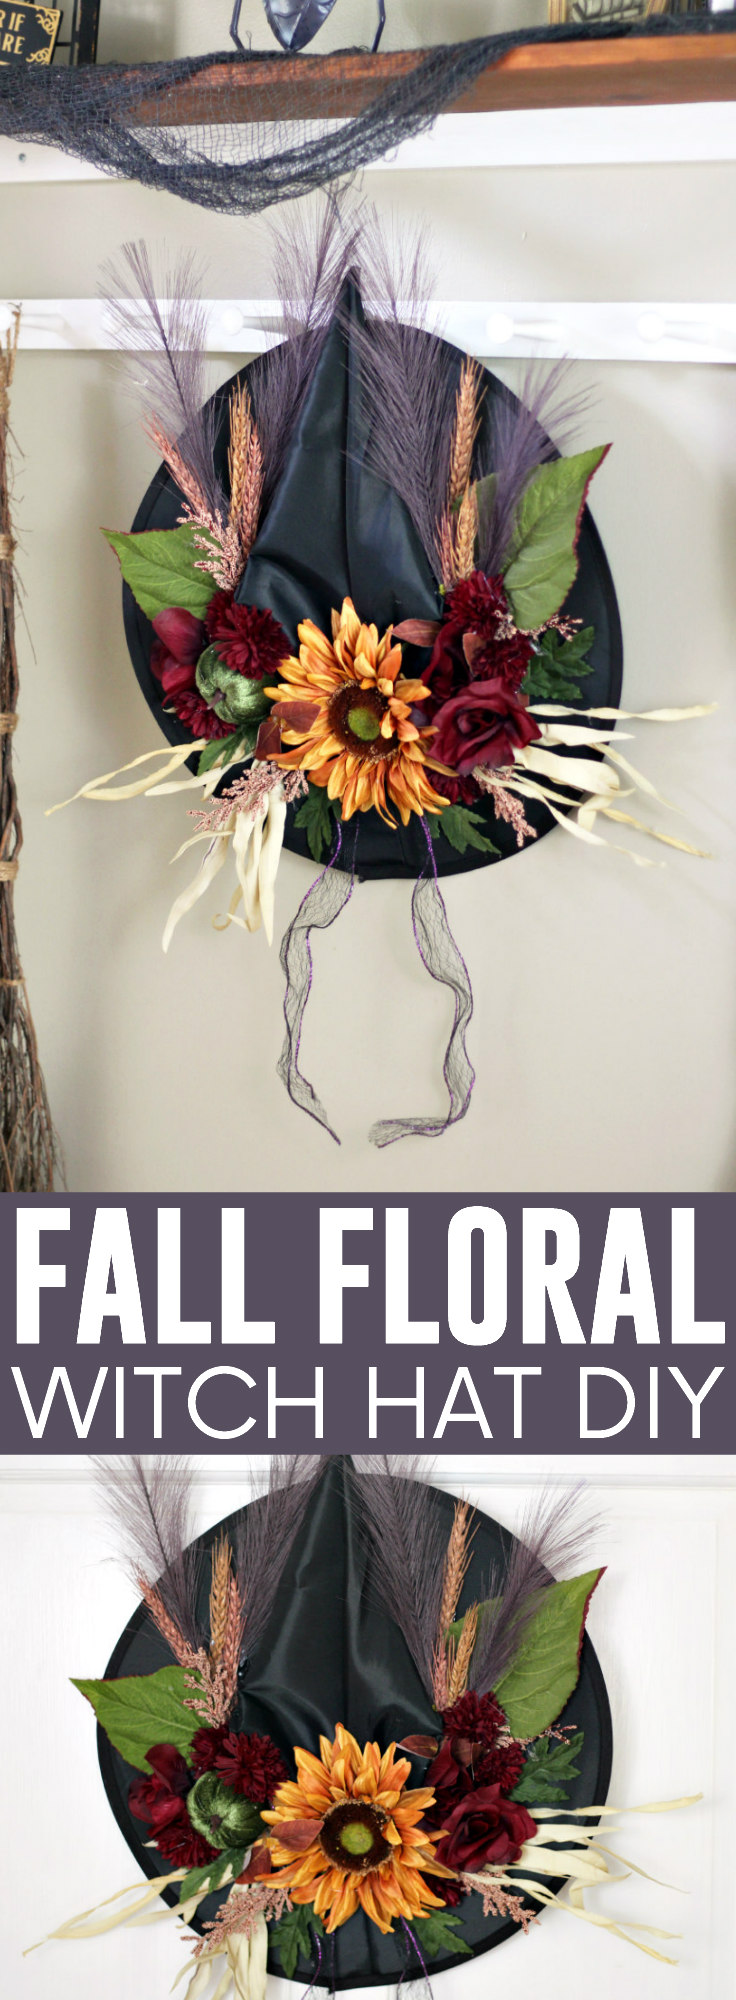 Fall Floral Witch Hat DIY pinnable image.